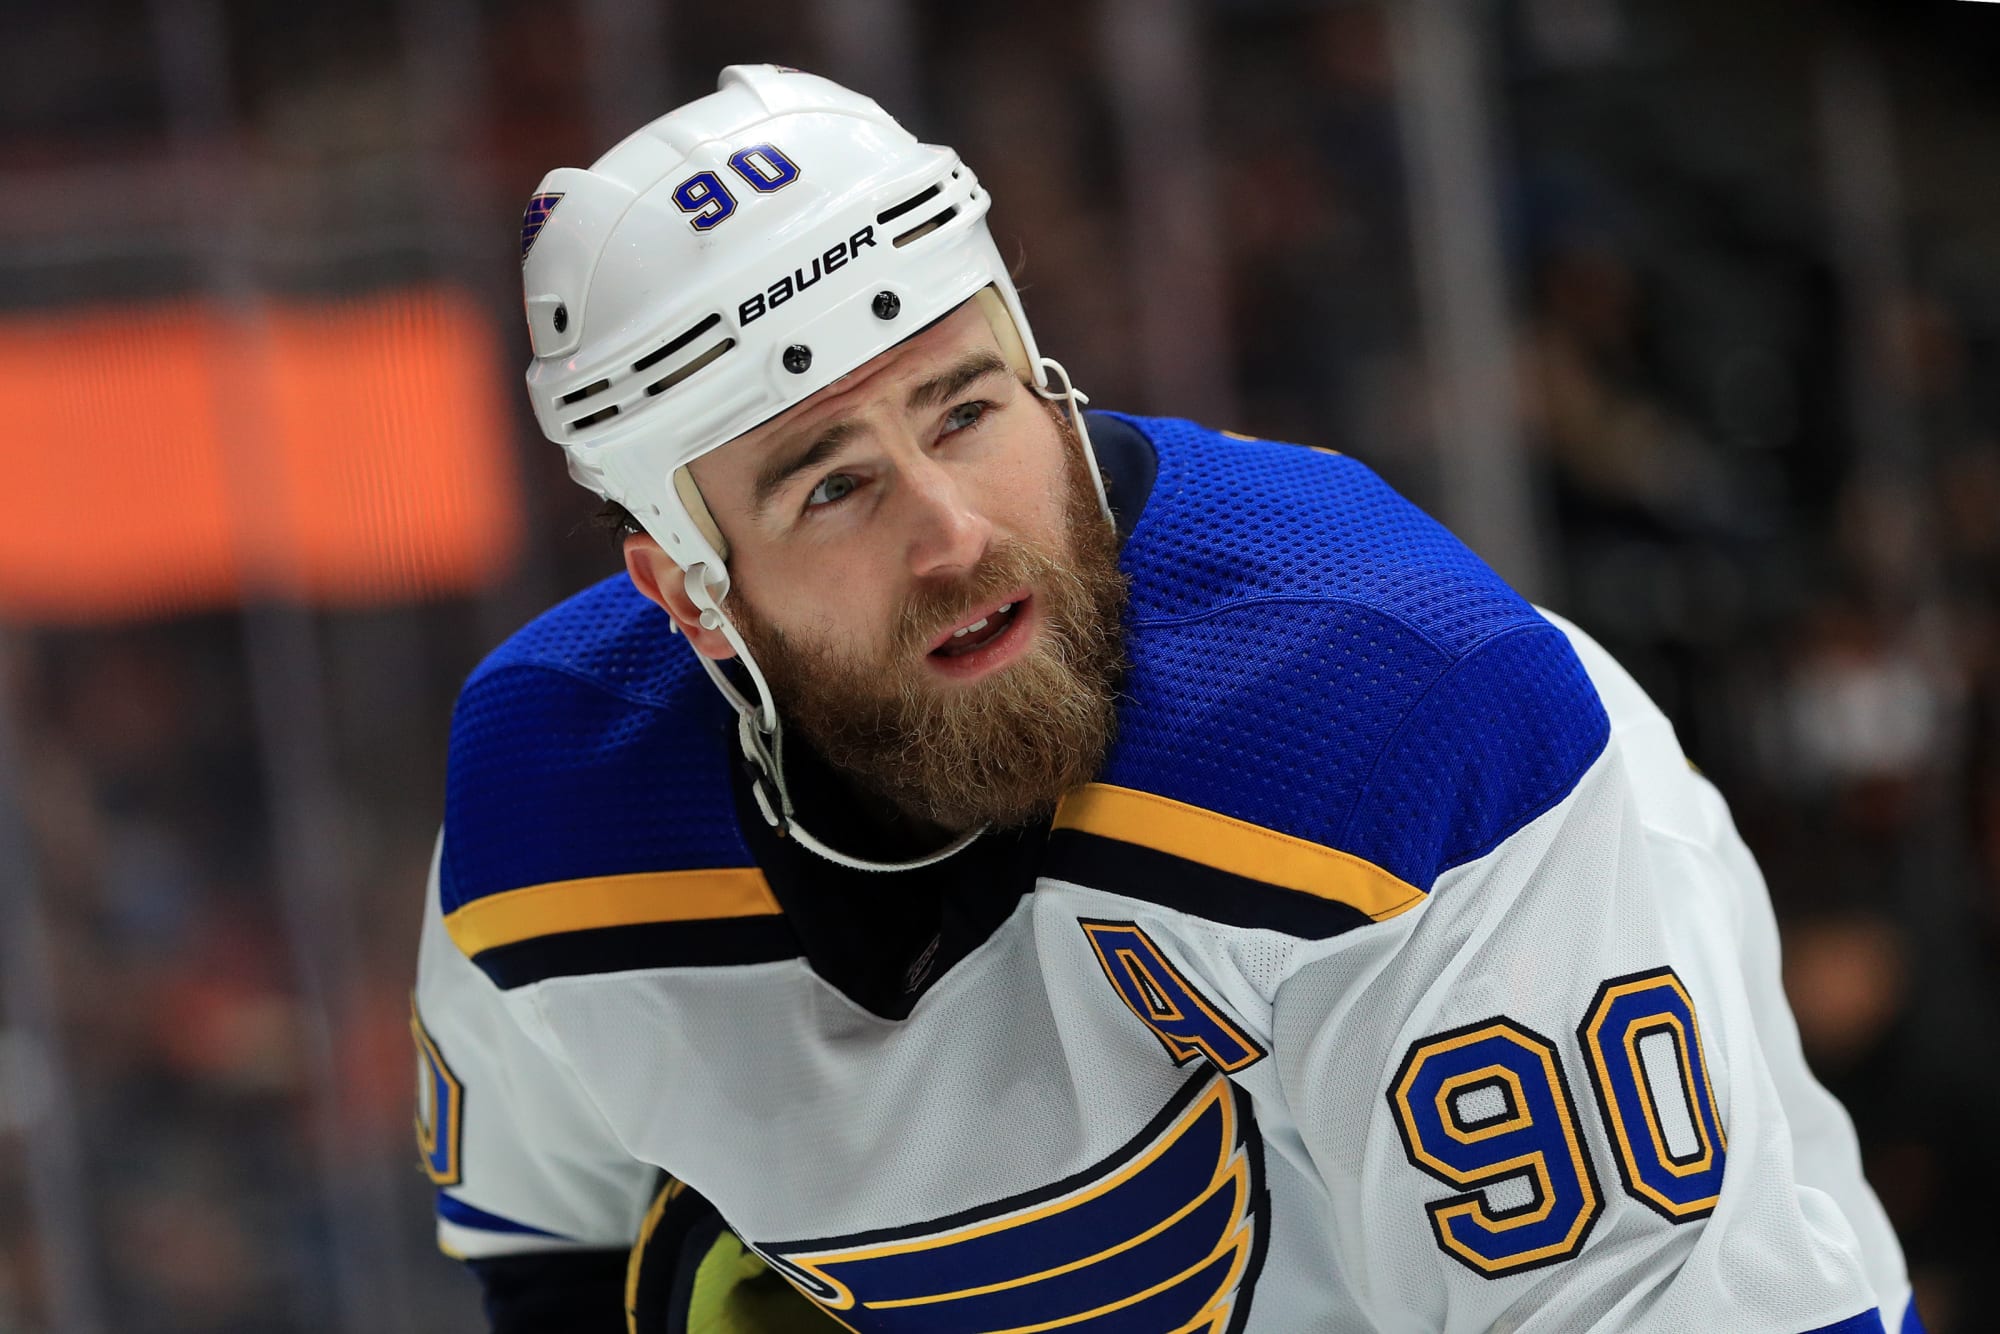 Ryan O'Reilly 90 for St Louis Blues fans Backpack for Sale by Simo-Sam